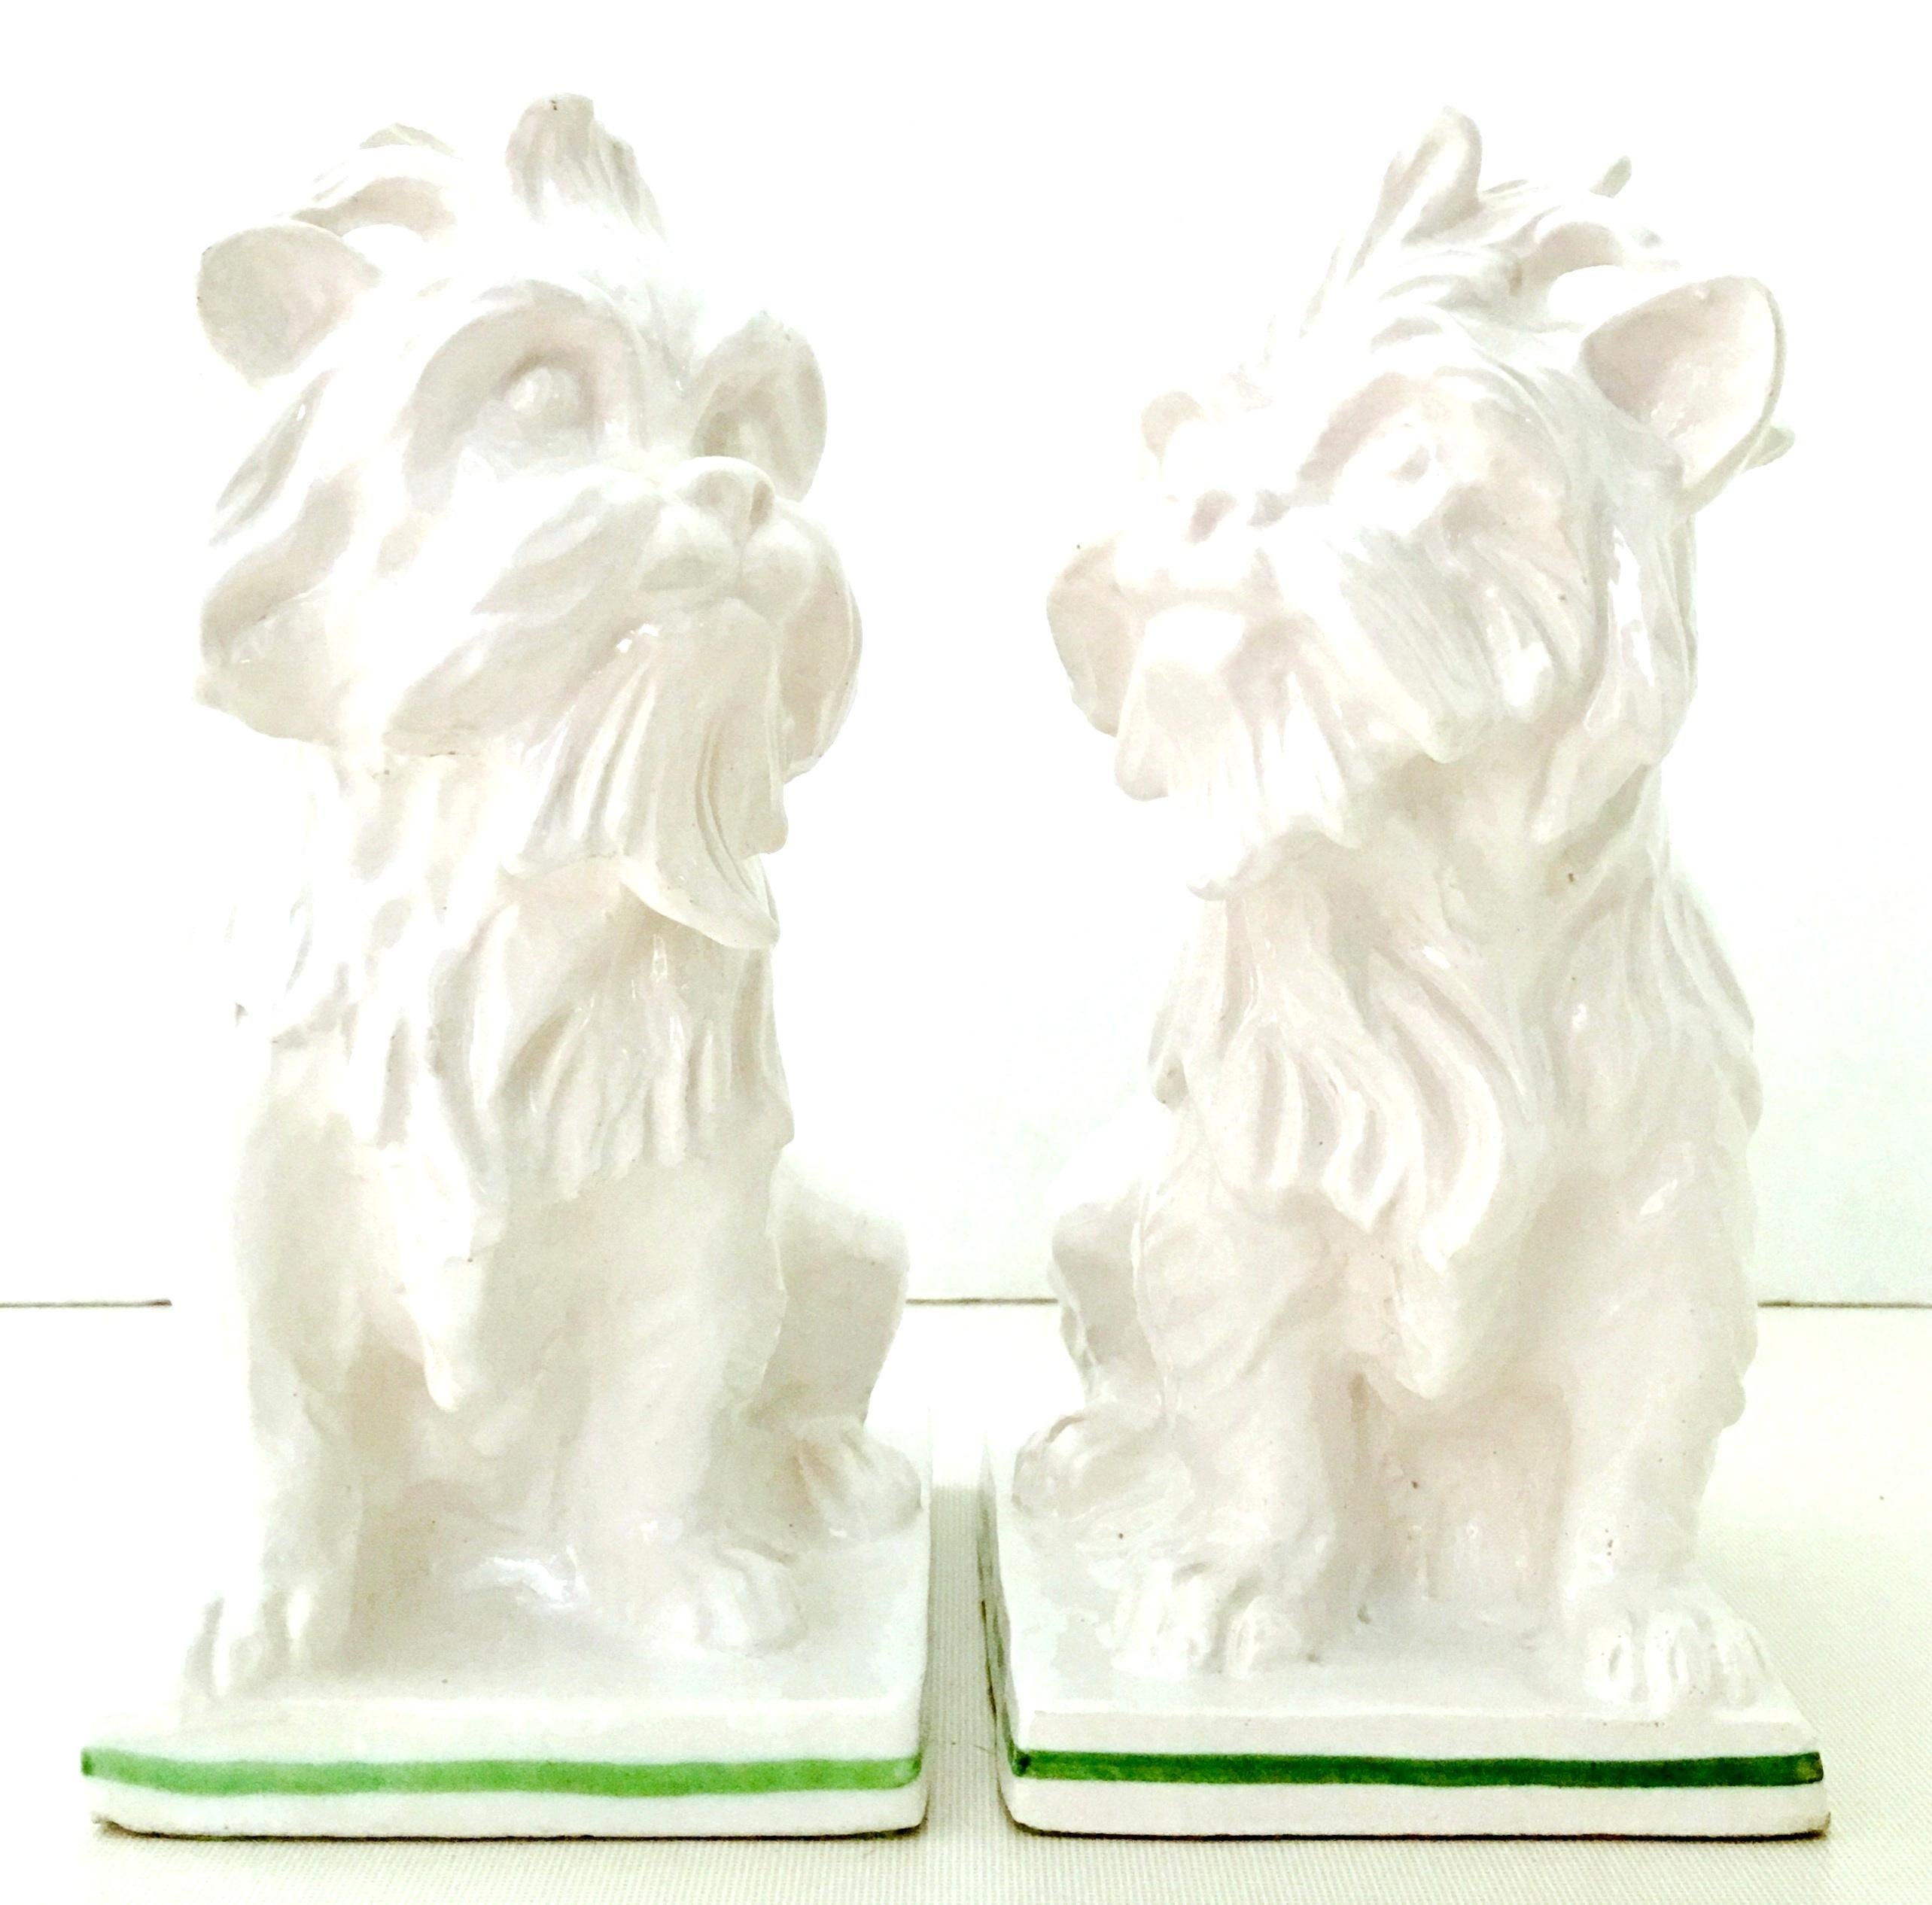 Mid-20th century Italian pair of ceramic glaze Staffordshire Style white with green piping detail terrier dog sculptures-Italy. Each piece is signed on the underside felt, Italy.